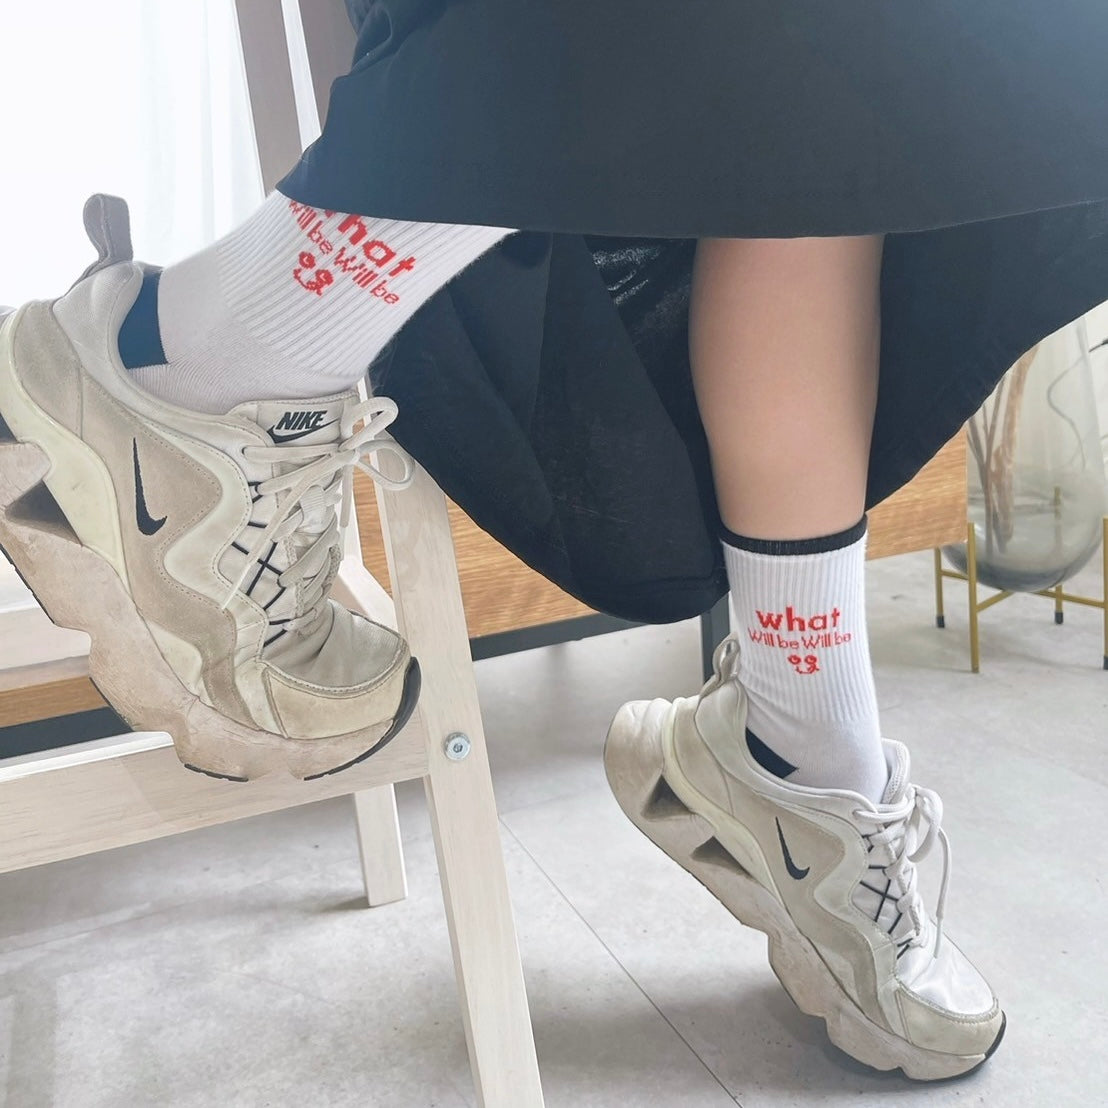 【2024SS】Will be Socks for owner / 靴下 for owner